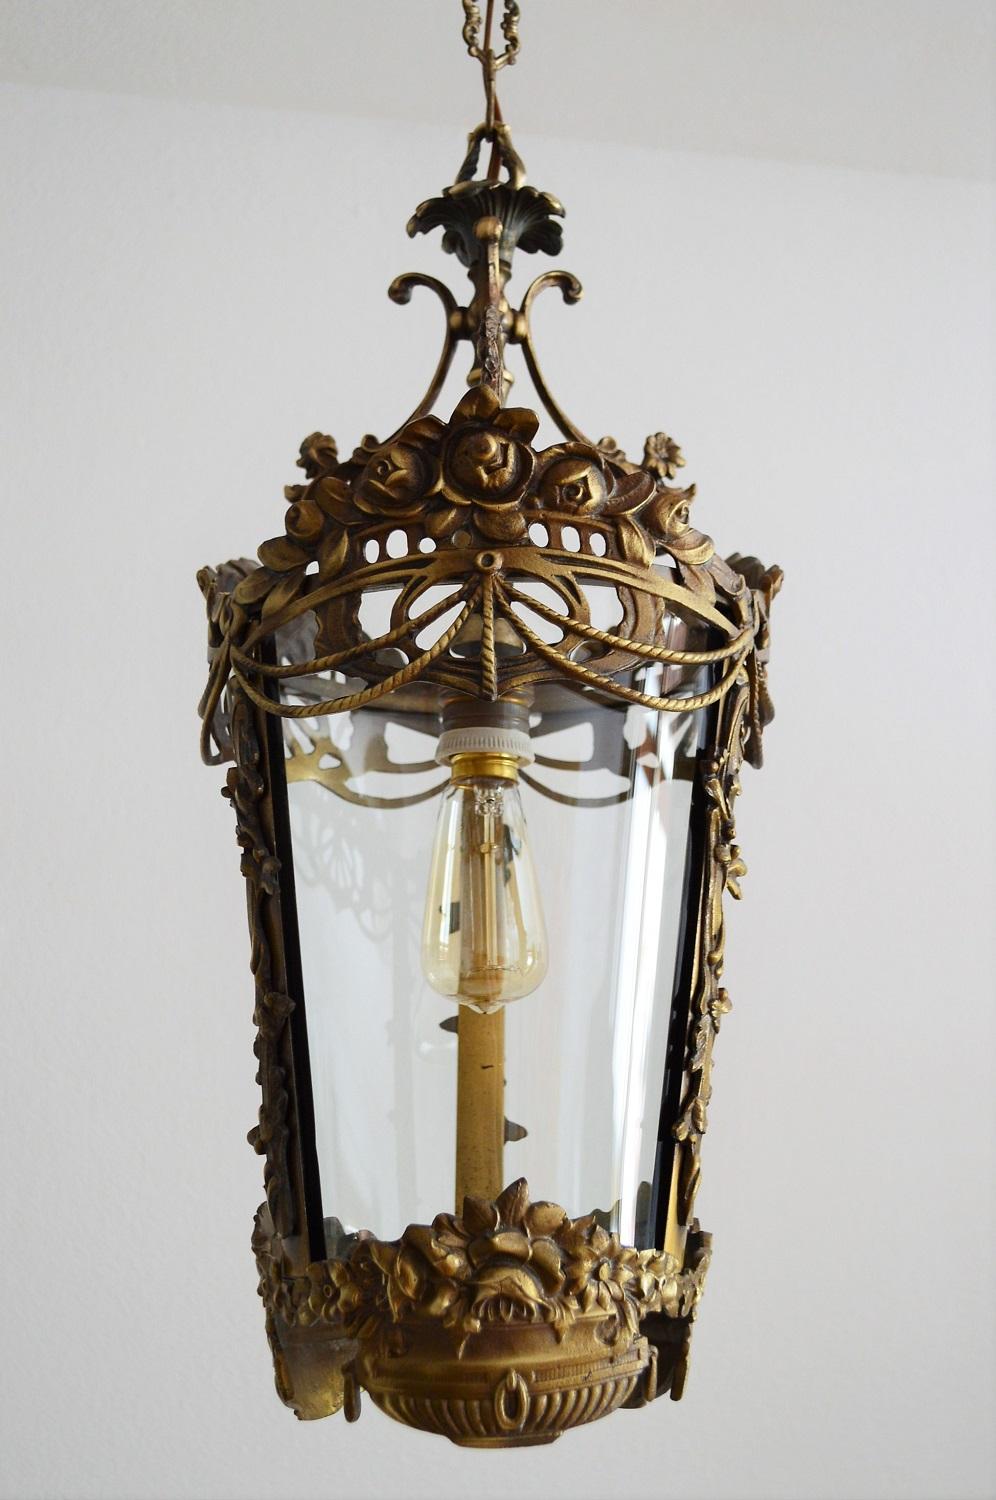 Mid-Century Modern Italian Mid-Century Bronze Lantern with Flowers and Garlands, 1950s For Sale